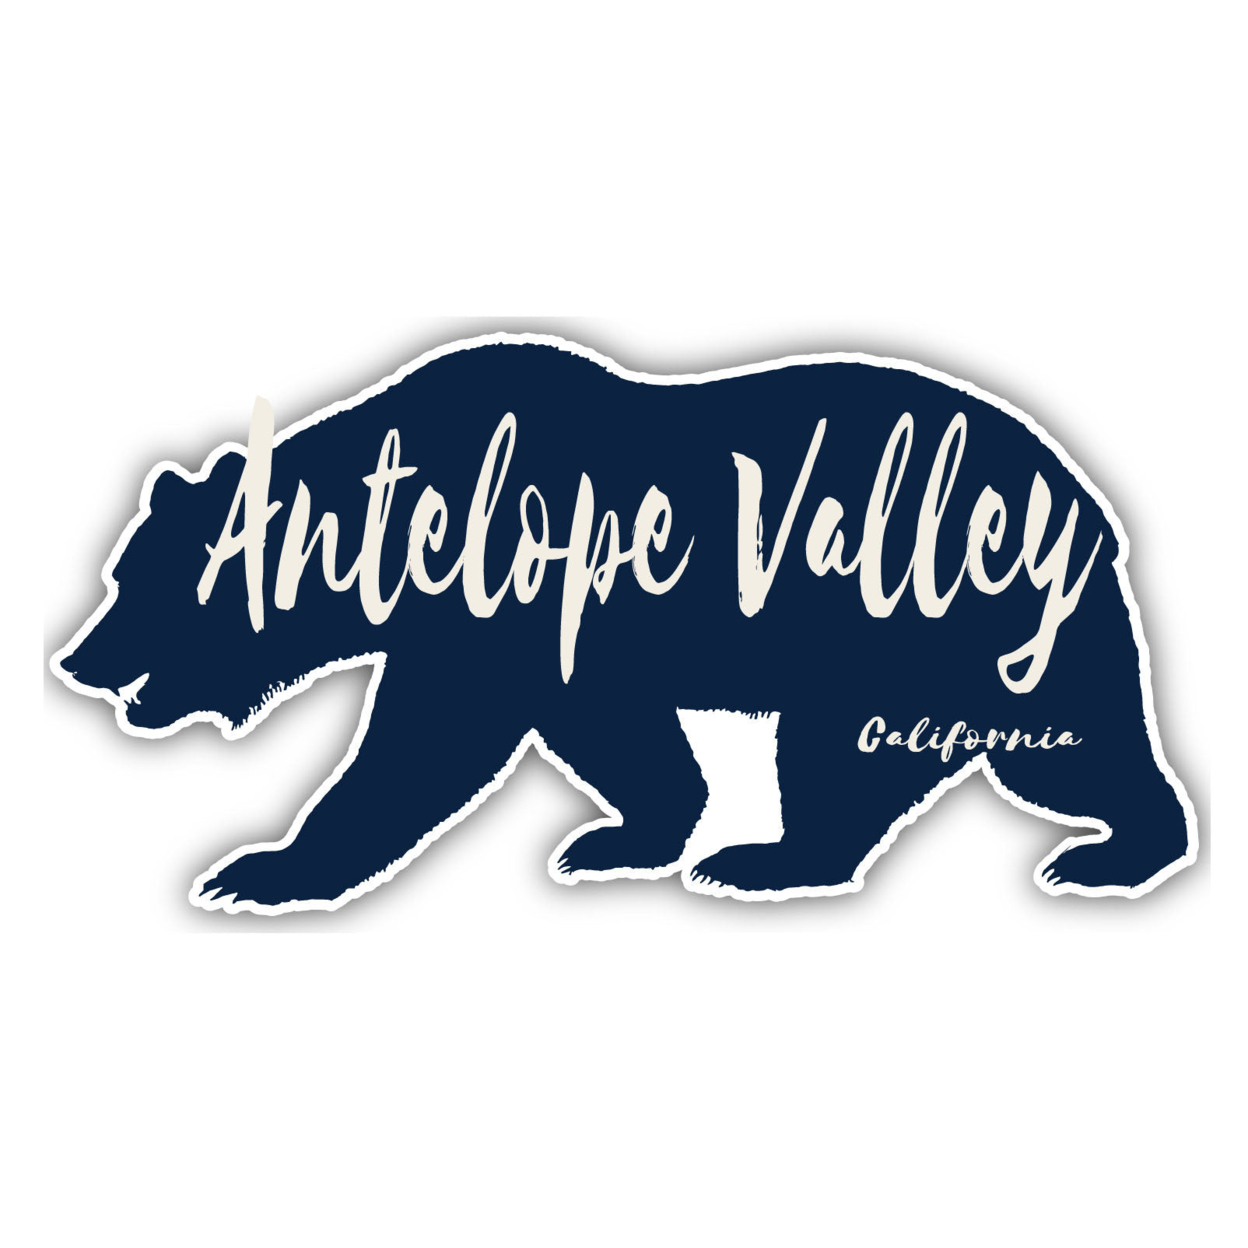 Antelope Valley California Souvenir Decorative Stickers (Choose Theme And Size) - 4-Pack, 8-Inch, Bear